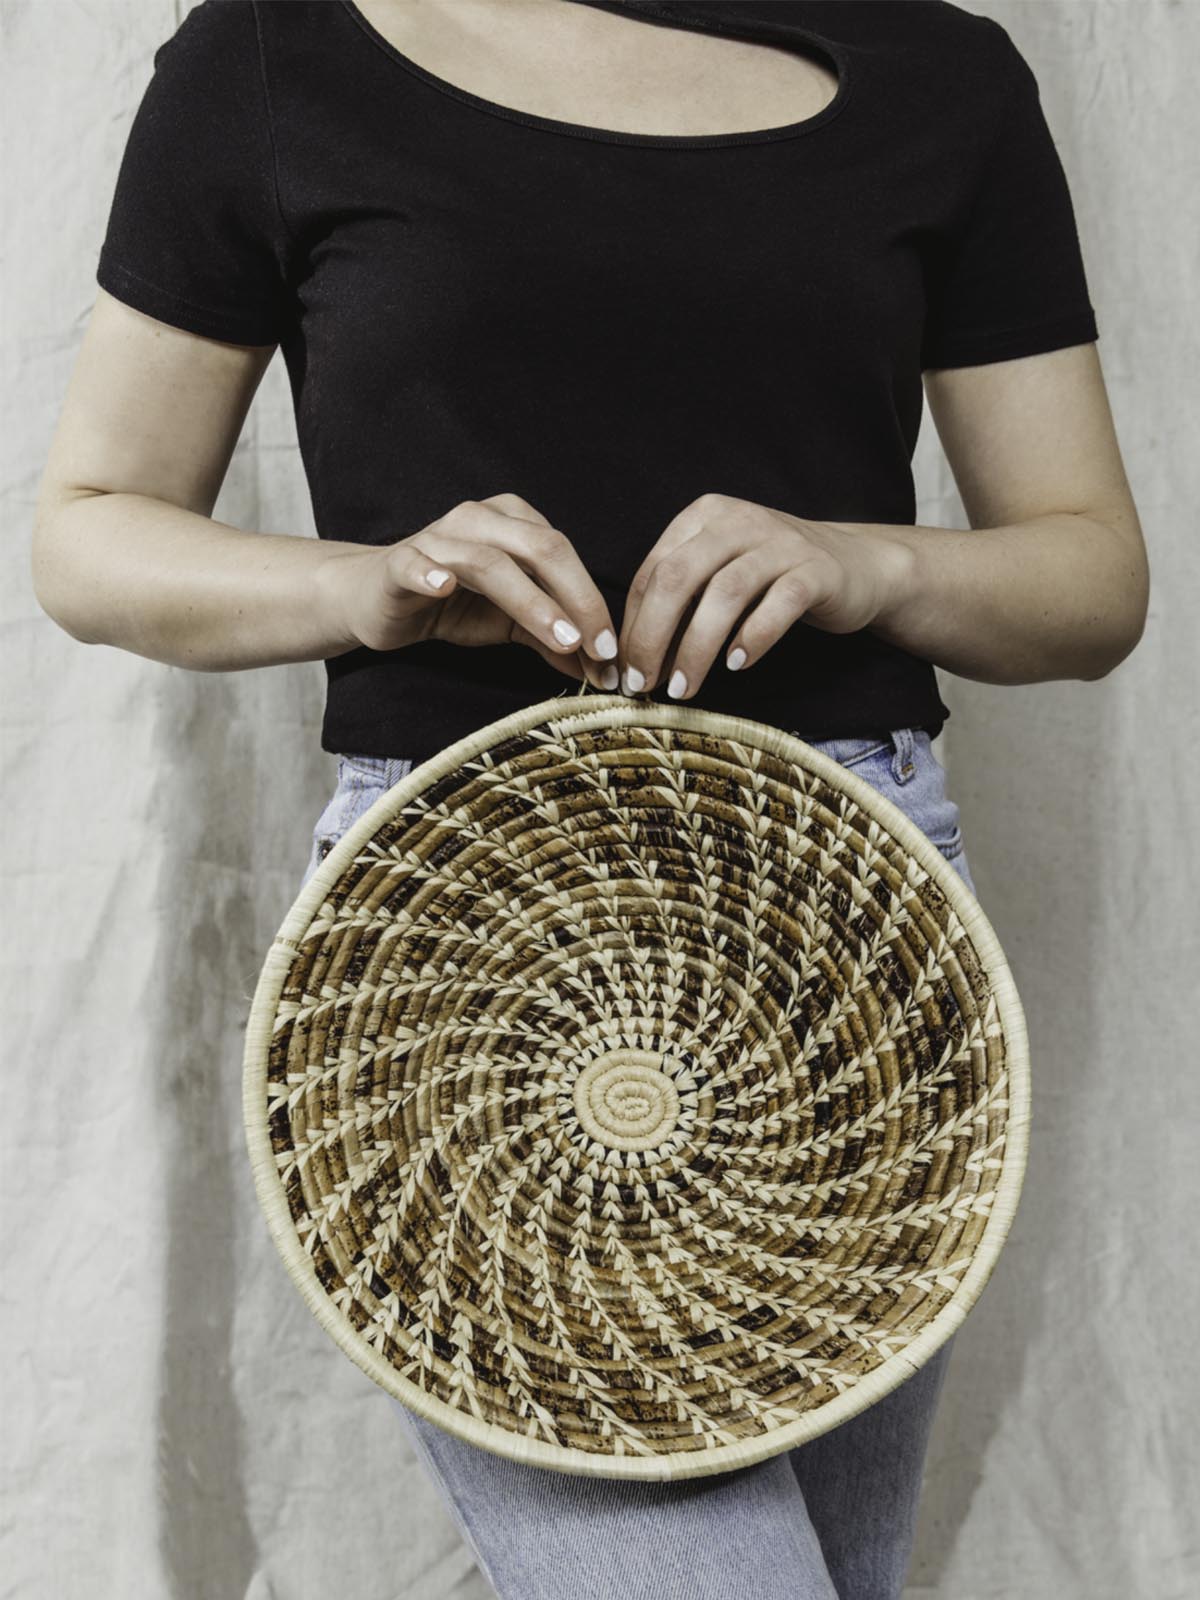 Model holding large brown and tan basket.